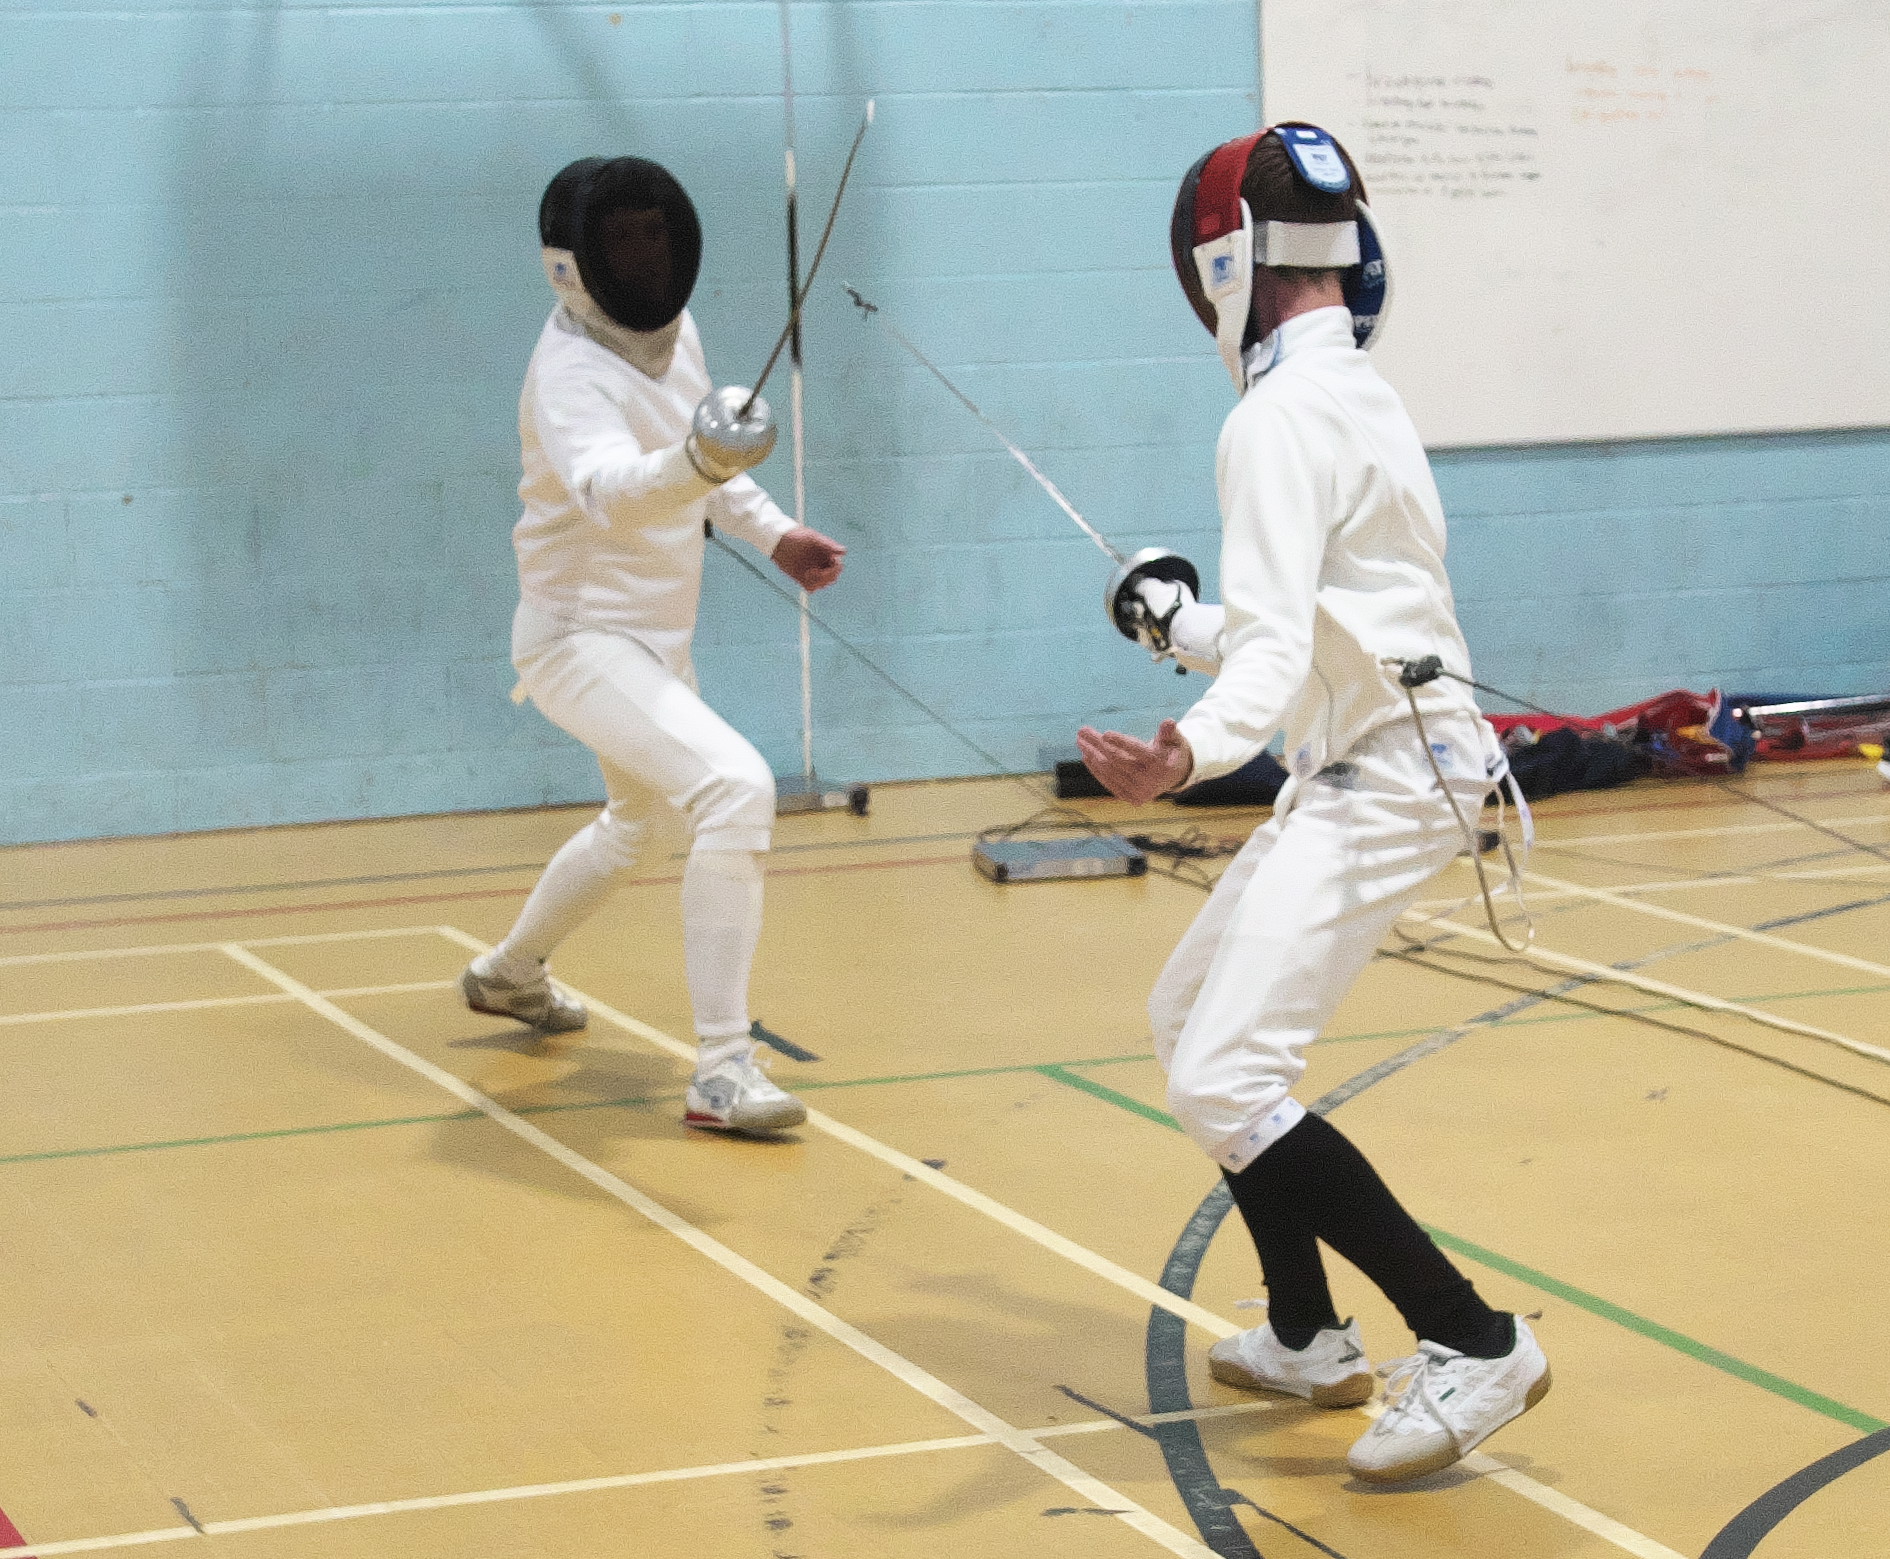 One of the last fights in the 1-hit epee - John vs Jamie